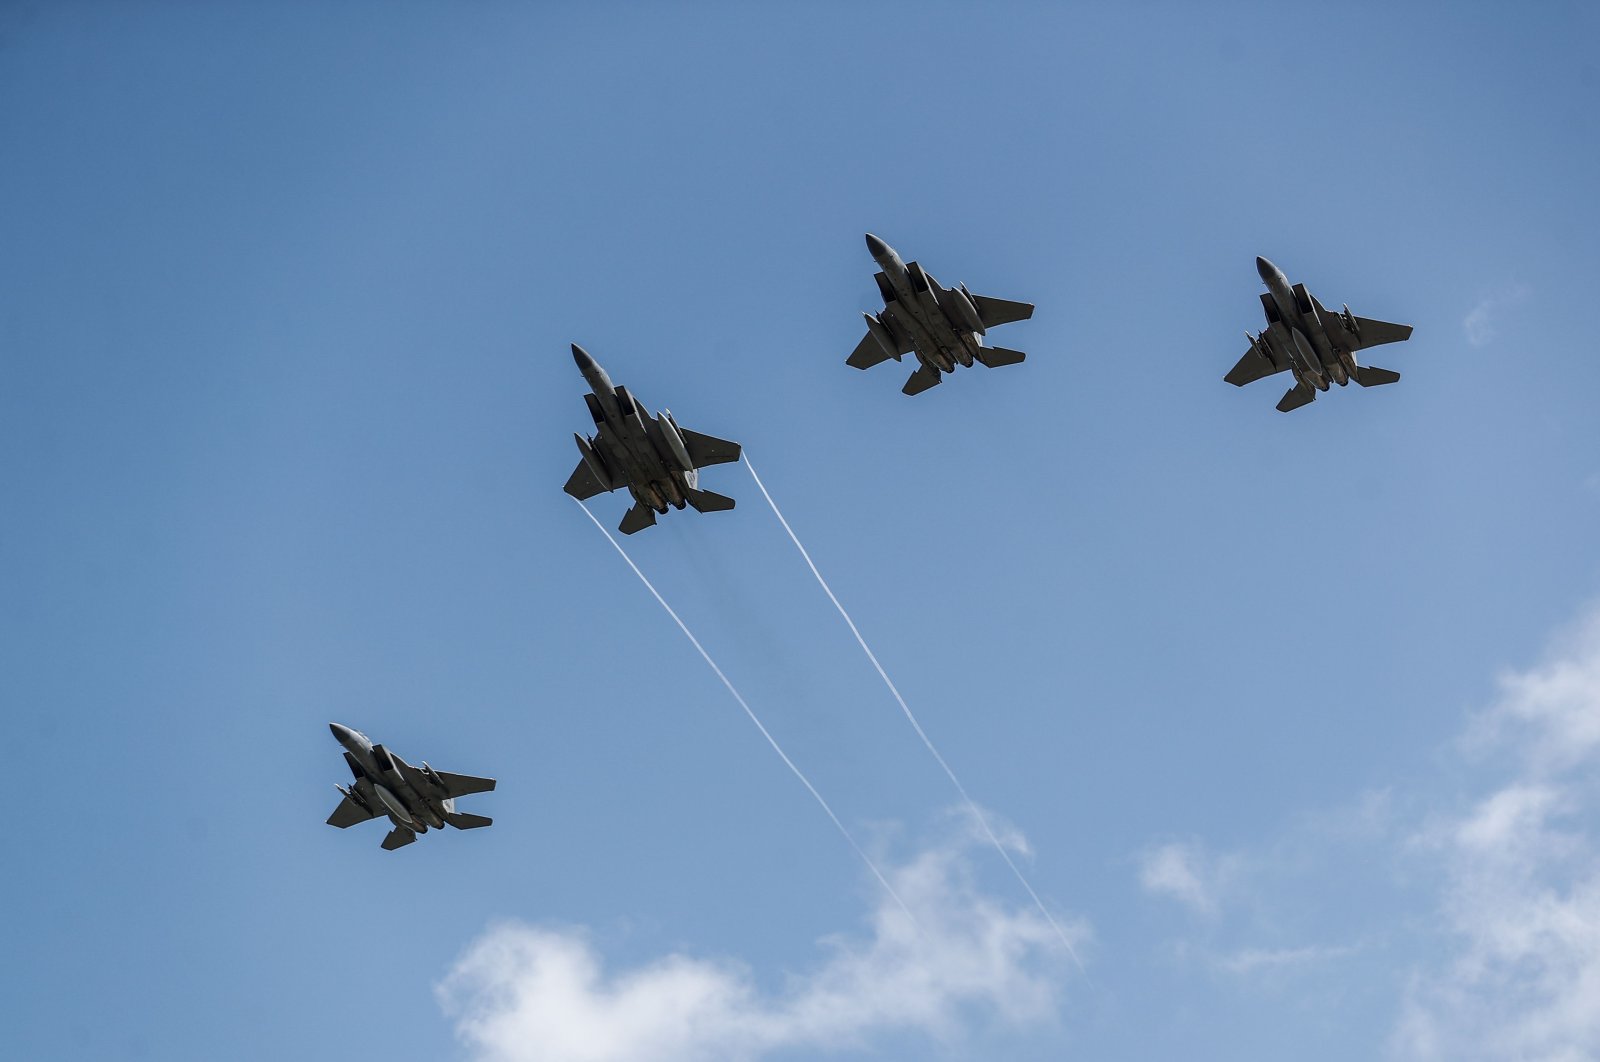 US Air Force F-15 fighter jets fly over Vierville-sur-Mer, northwestern France, on June 6, 2020, as part of D-Day commemorations marking the 76th anniversary of the World War II Allied landings in Normandy. (AFP Photo)